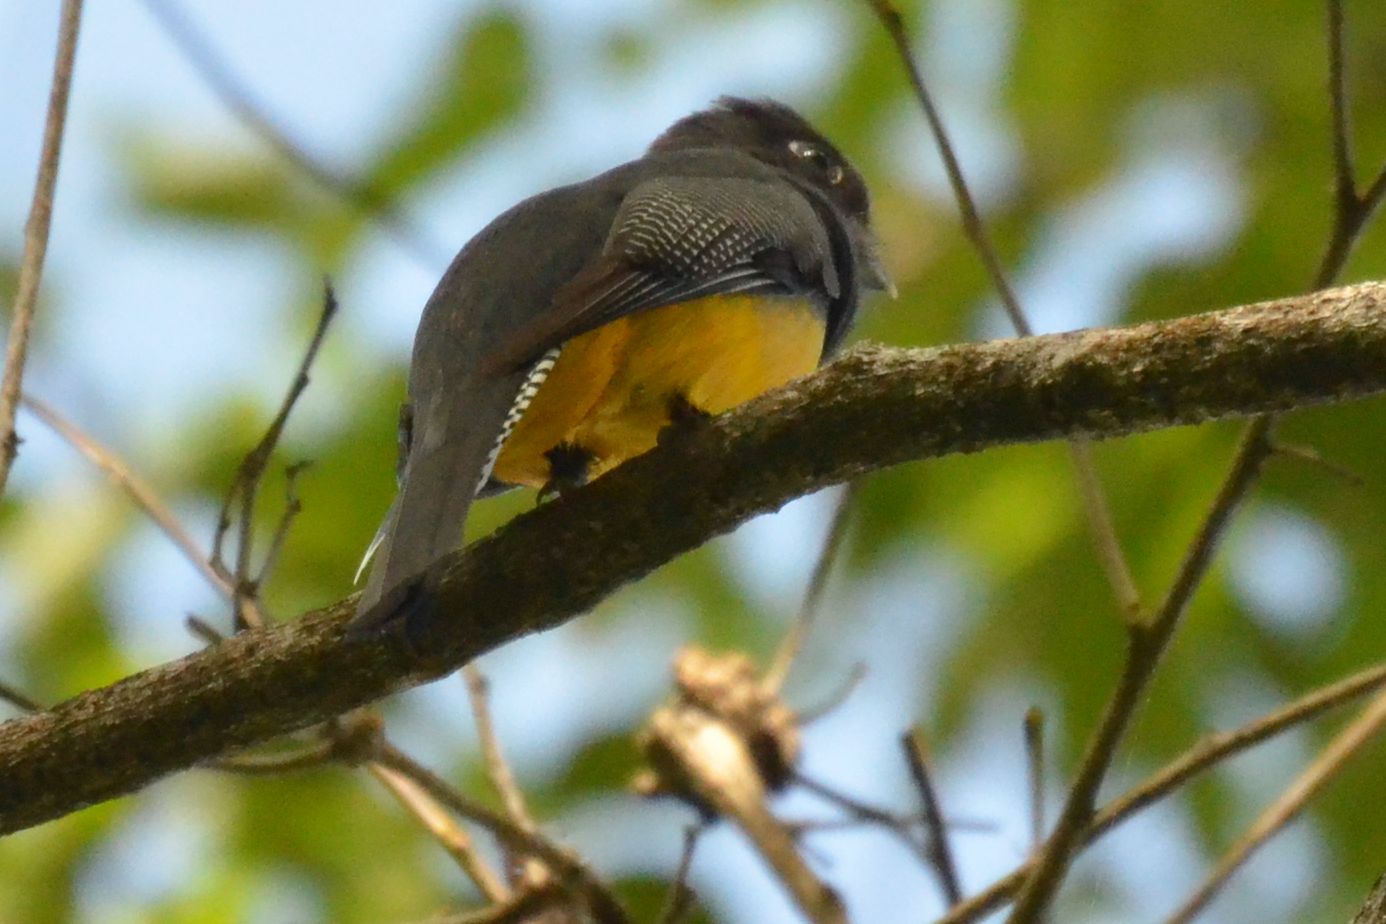 Click picture to see more Violaceous Trogons.